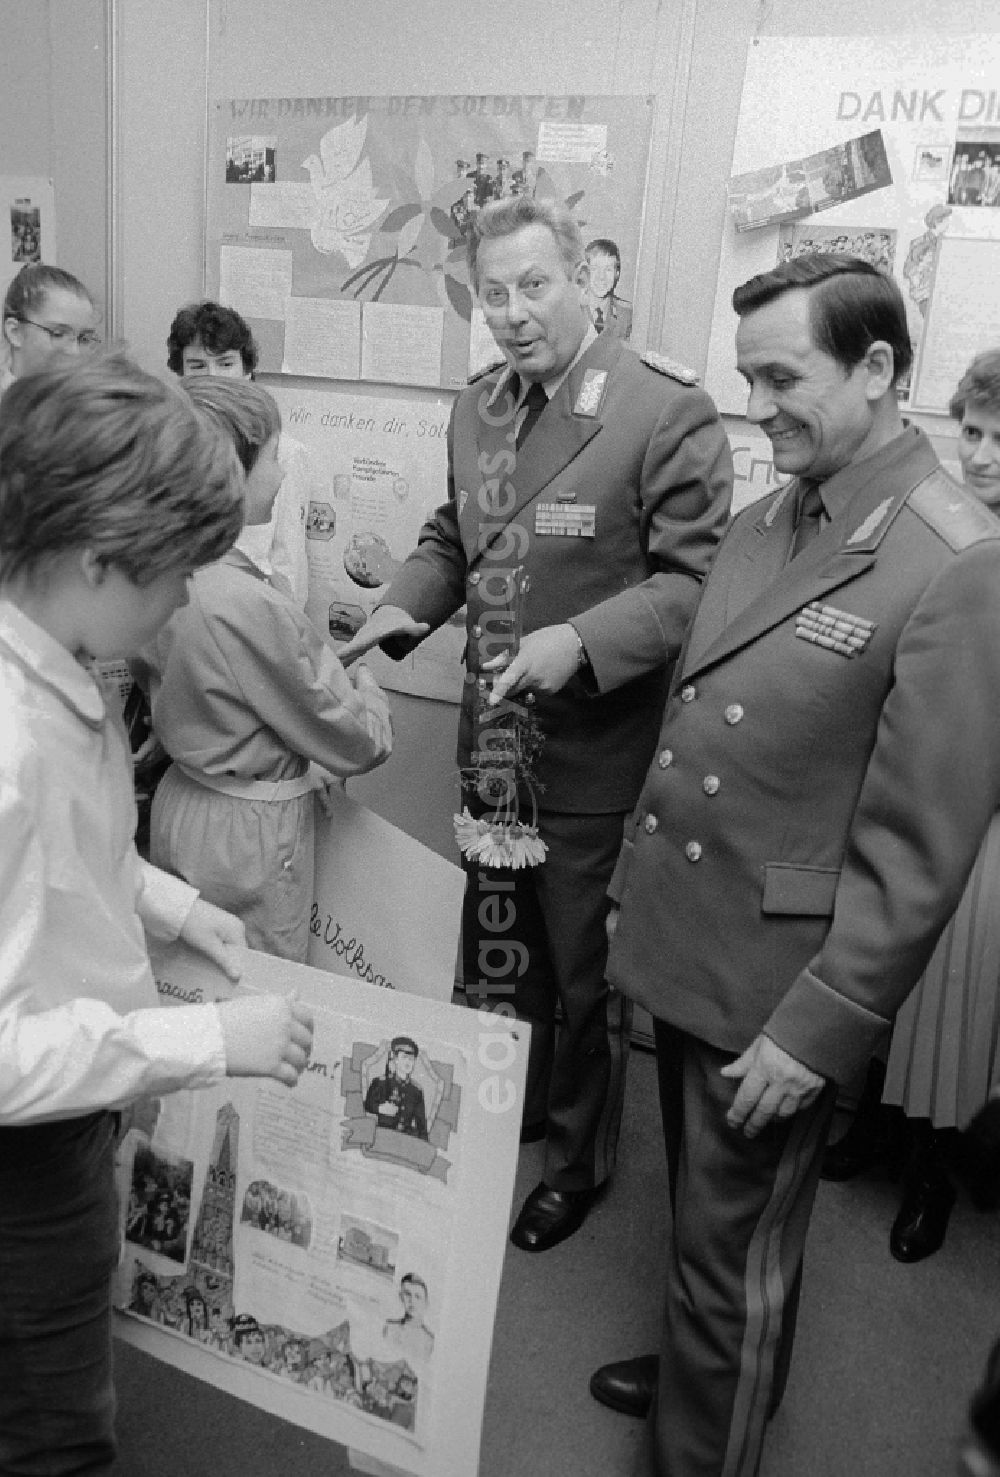 GDR image archive: Berlin - Young pioneers hand tinkered wall newspapers in the house of the German-Soviet friendship (DSF) to generals of the national national army (NVA) and the red army in Berlin, the former capital of the GDR, German democratic republic